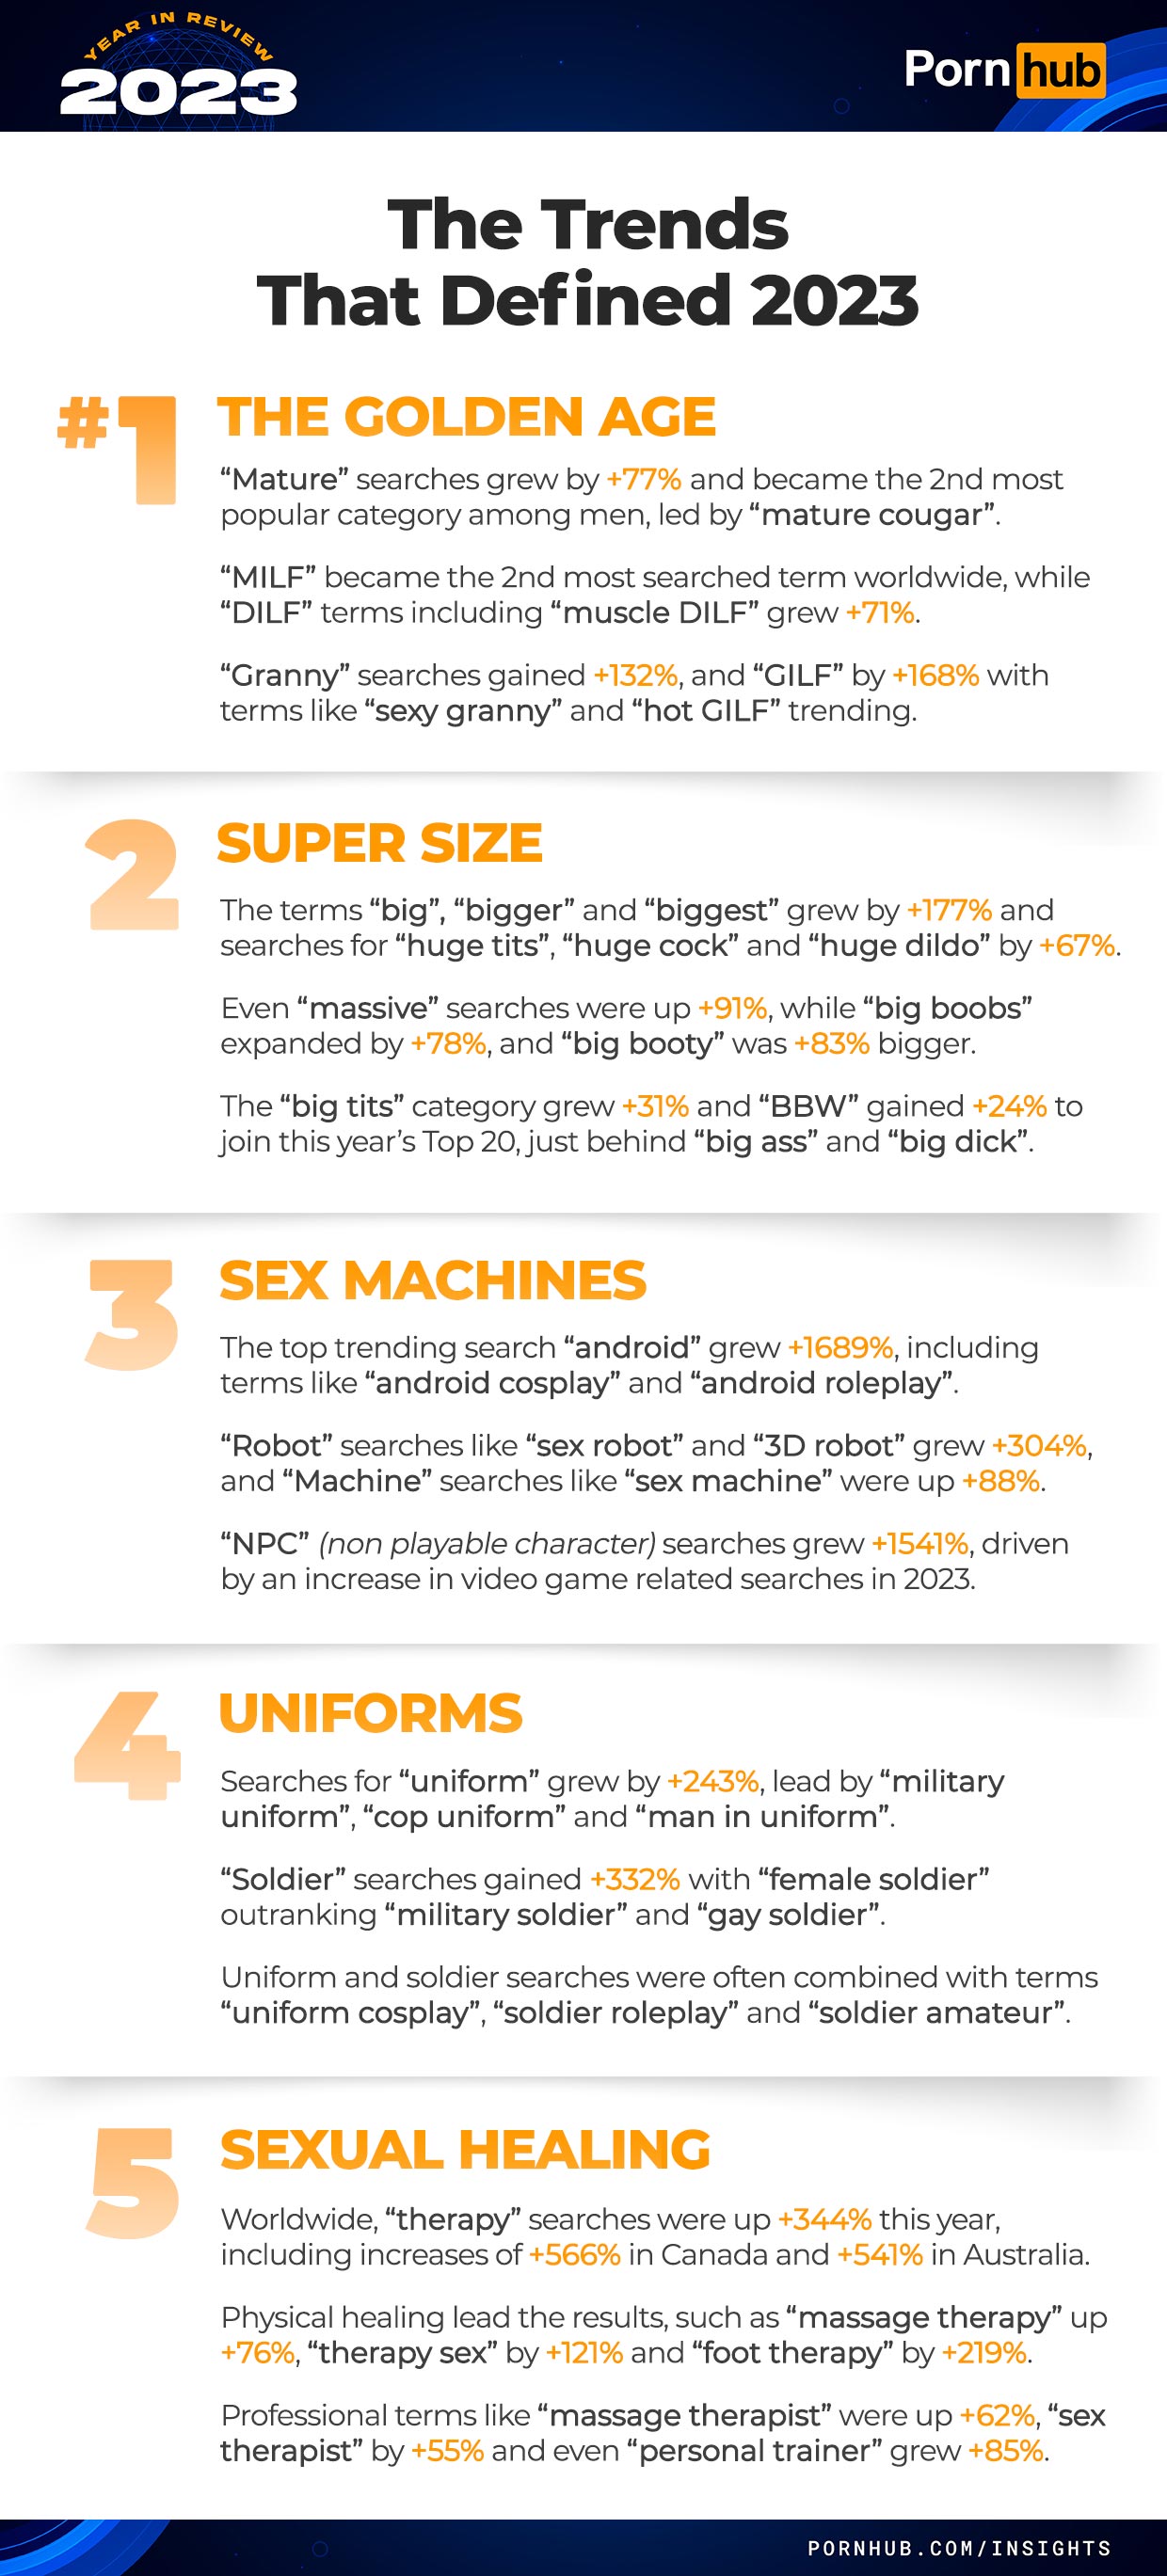 https://es.phncdn.com/misc/insights/yir2023/pornhub-insights-2023-year-in-review-trends-that-defined-2023.jpg